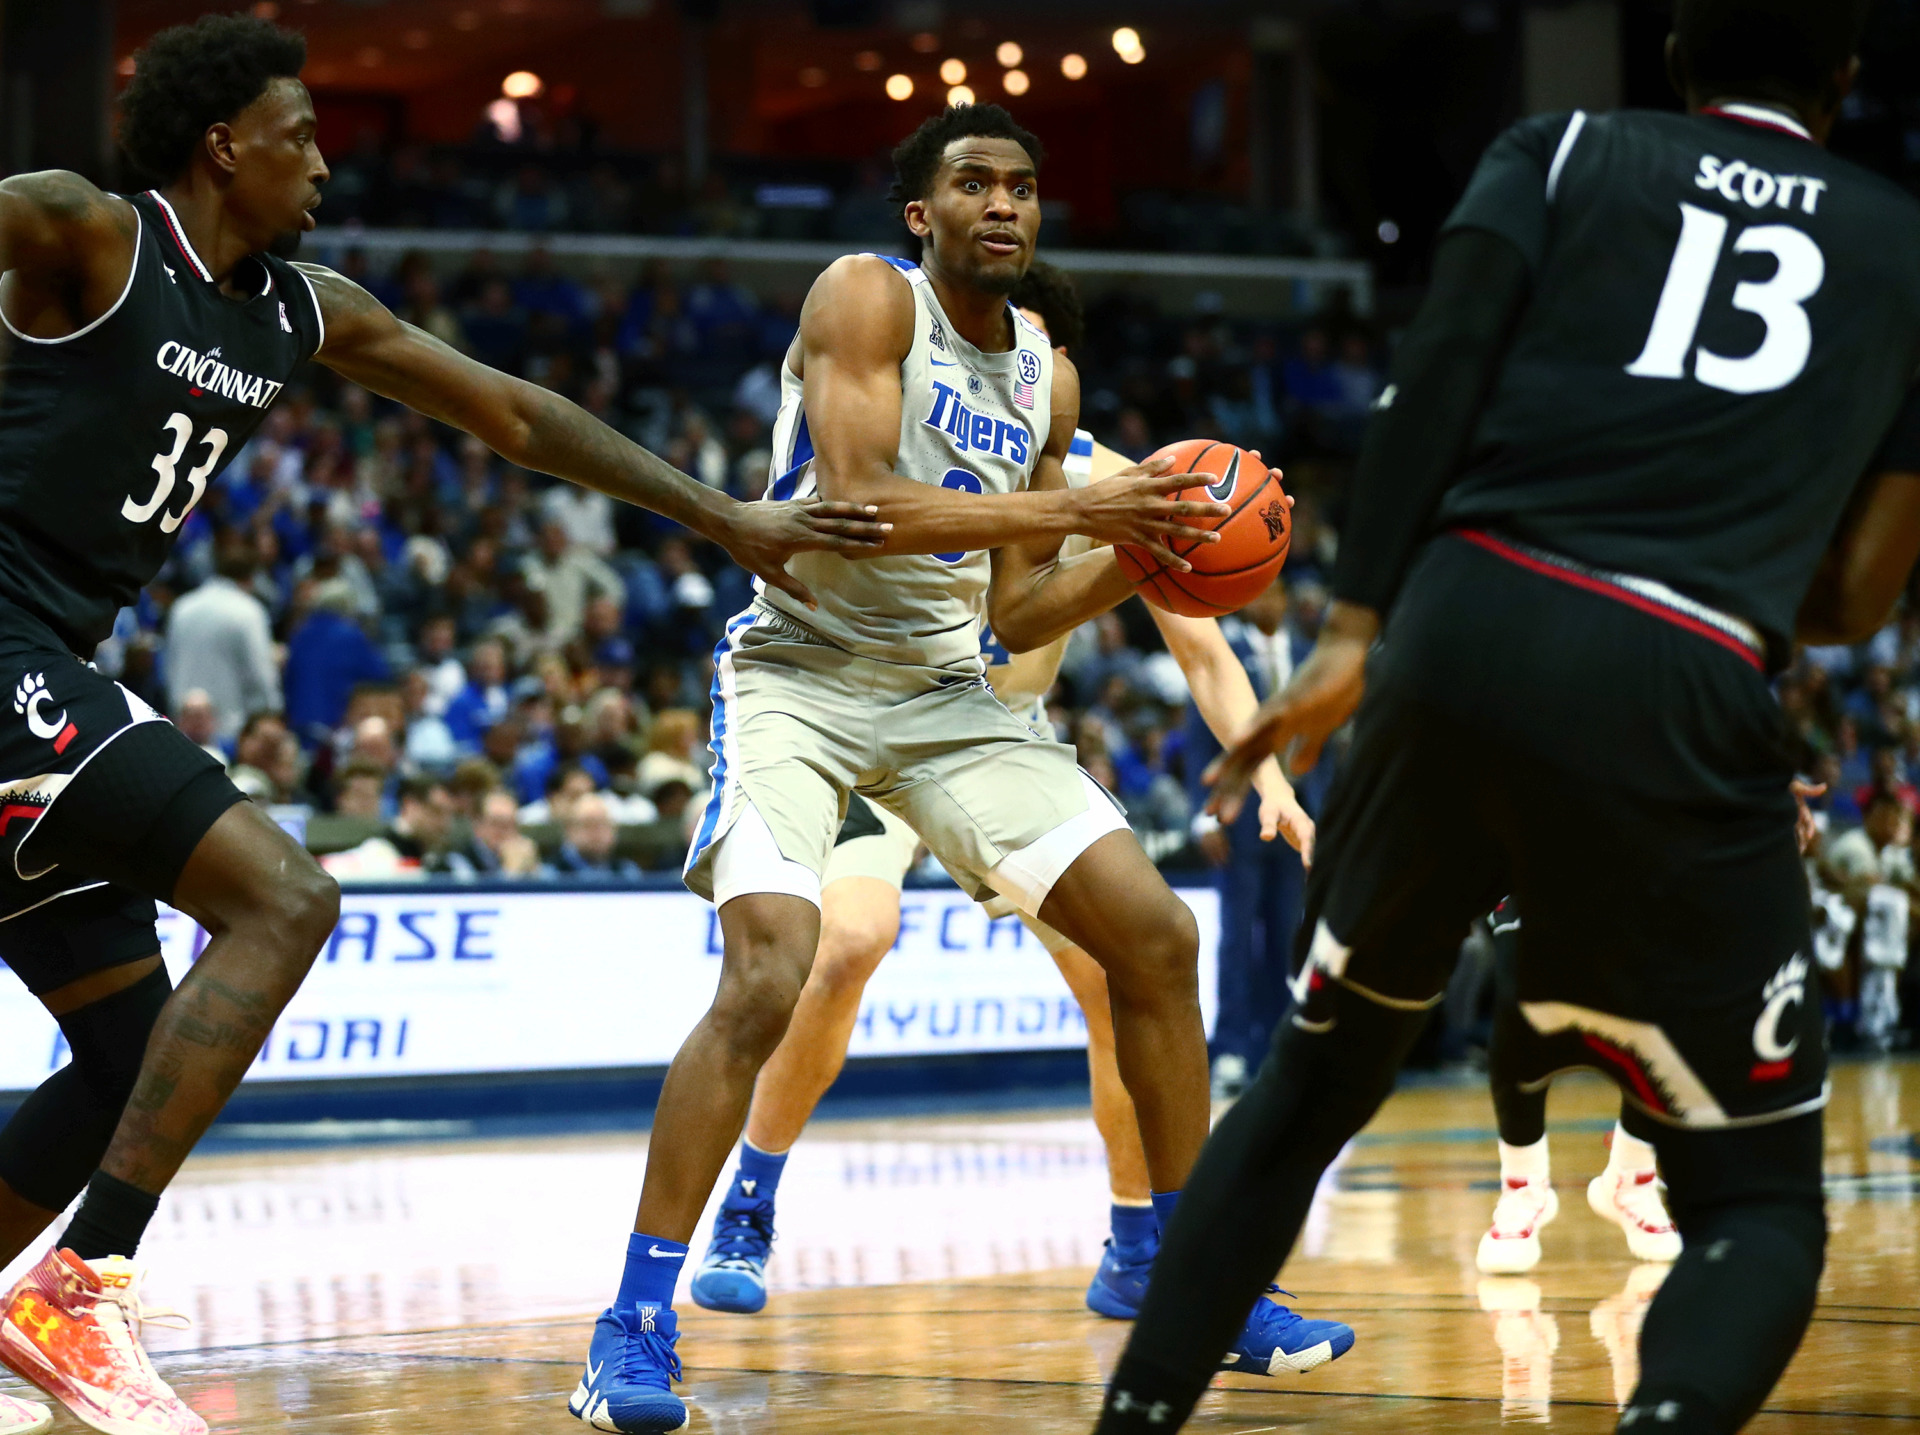 <strong>Memphis senior guard Jeremiah Martin (3) weaves through defenders during a game against the Cincinnati Bearcats on Thursday, Feb. 7, 2019, in Memphis. A strong performance from Martin wasn't enough to save the Tigers, who fell 69-64.</strong> (Houston Cofield/Daily Memphian)